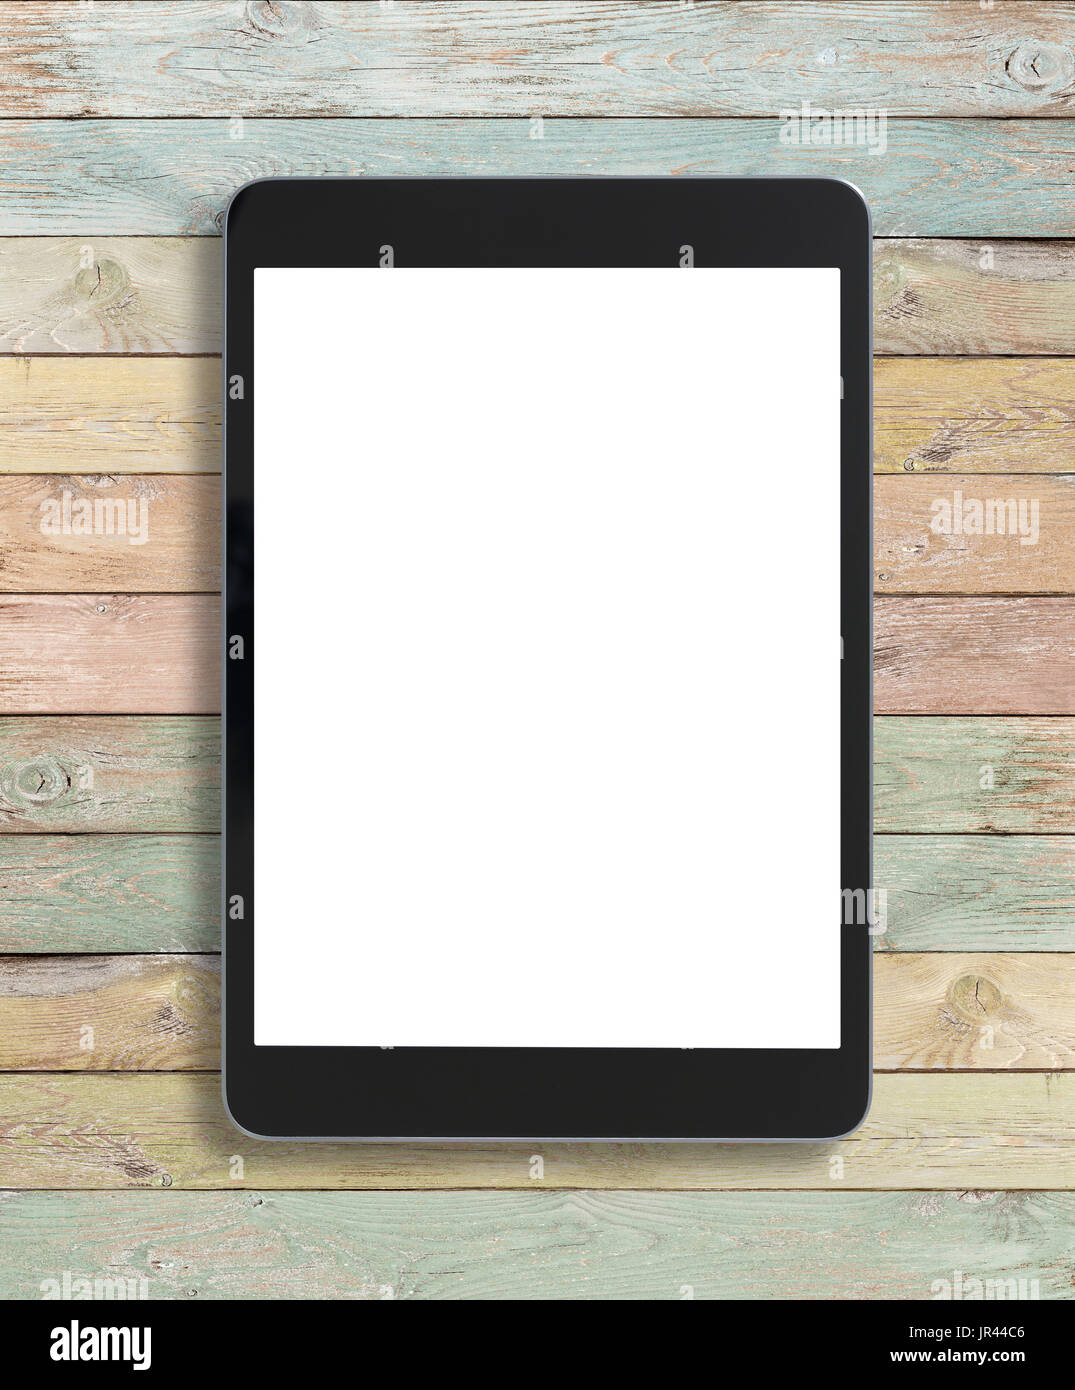 Black tablet pc on old wood colorful background Stock Photo